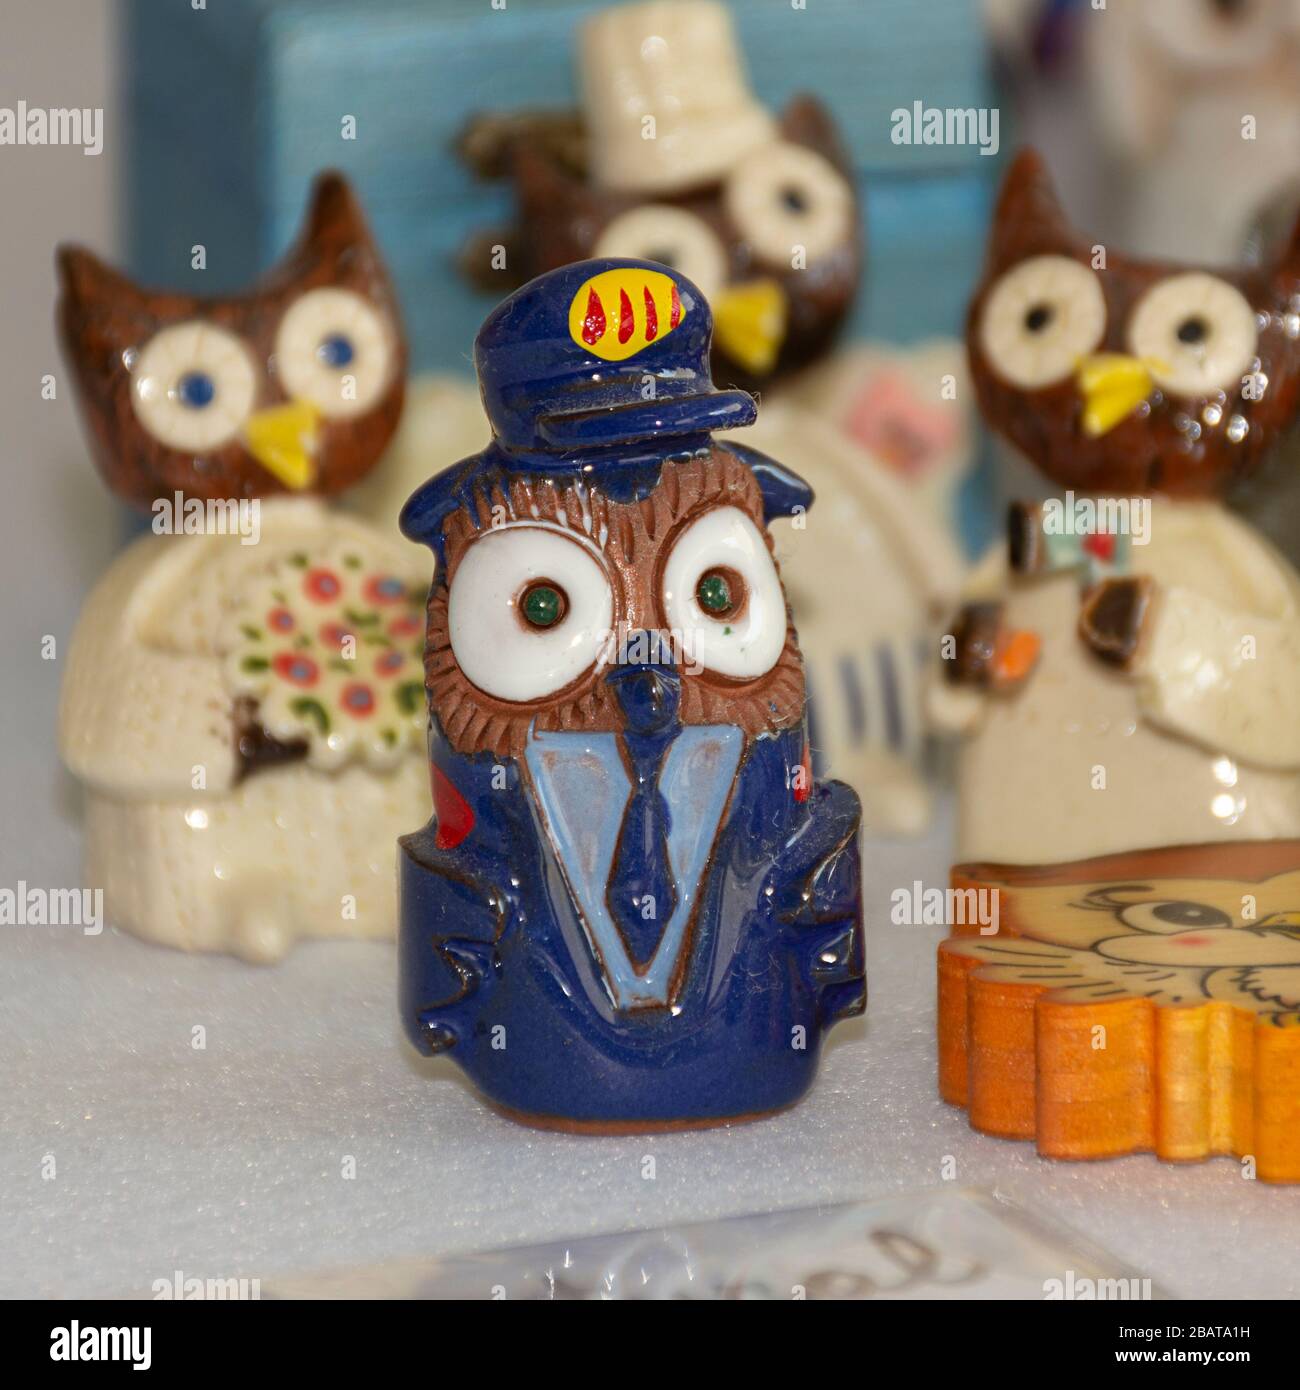 Owl collection. Different materials, shapes, colors and sizes. Souvenirs from the world. Stock Photo